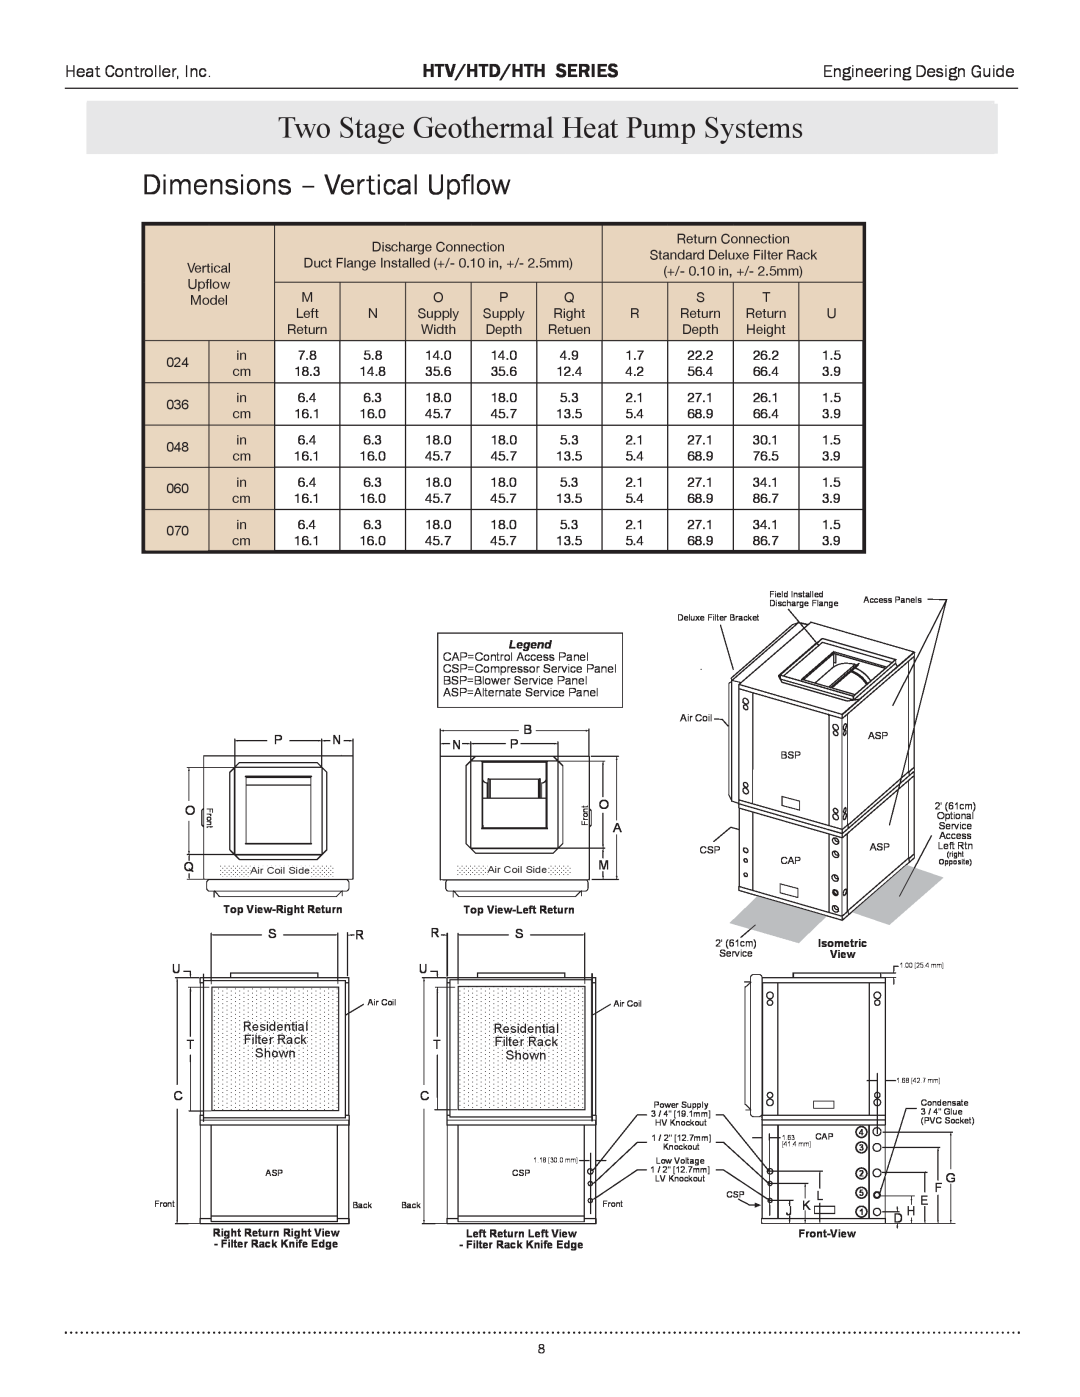 Heat Controller HTD SERIES, HTH SERIES, HTV SERIES Dimensions - Vertical Upflow, Htv/Htd/Hth Series, Discharge Connection 